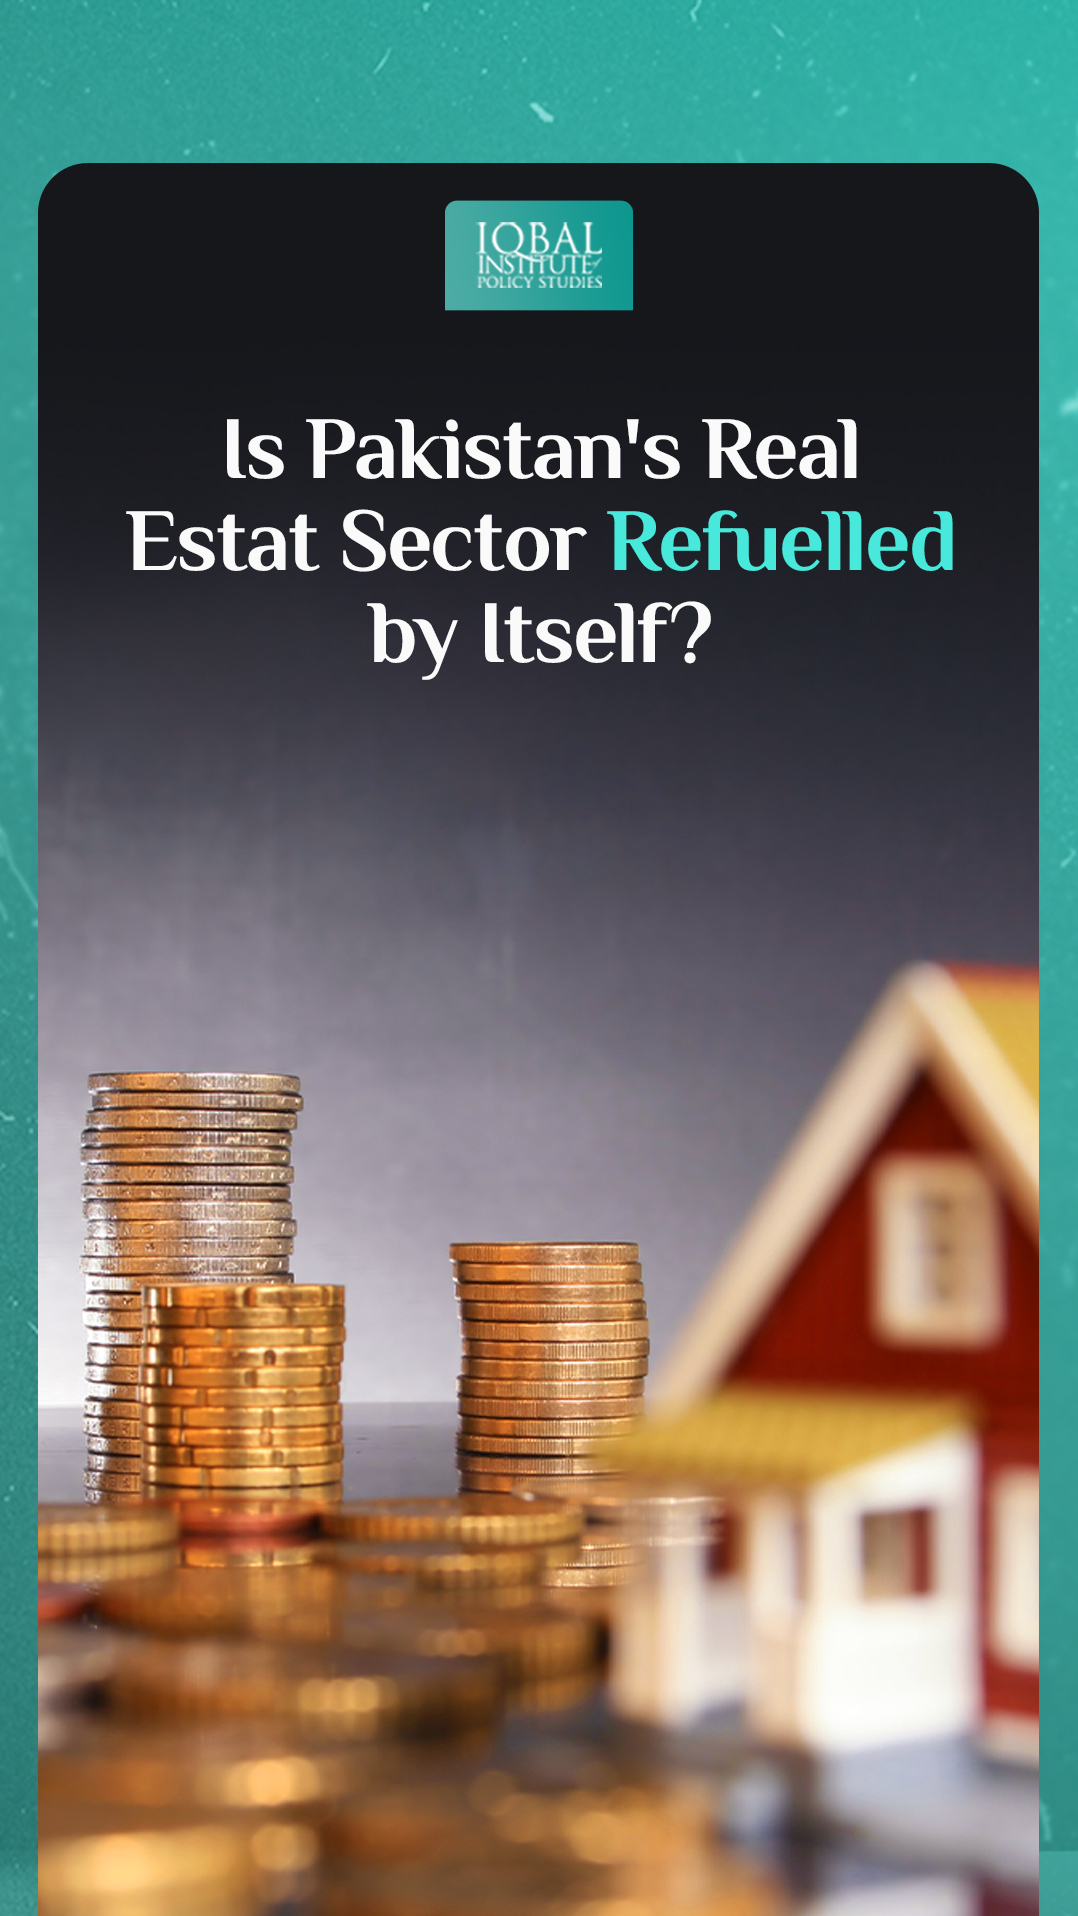 Is Pakistan's Real Estate Sector Refuelled by itself?